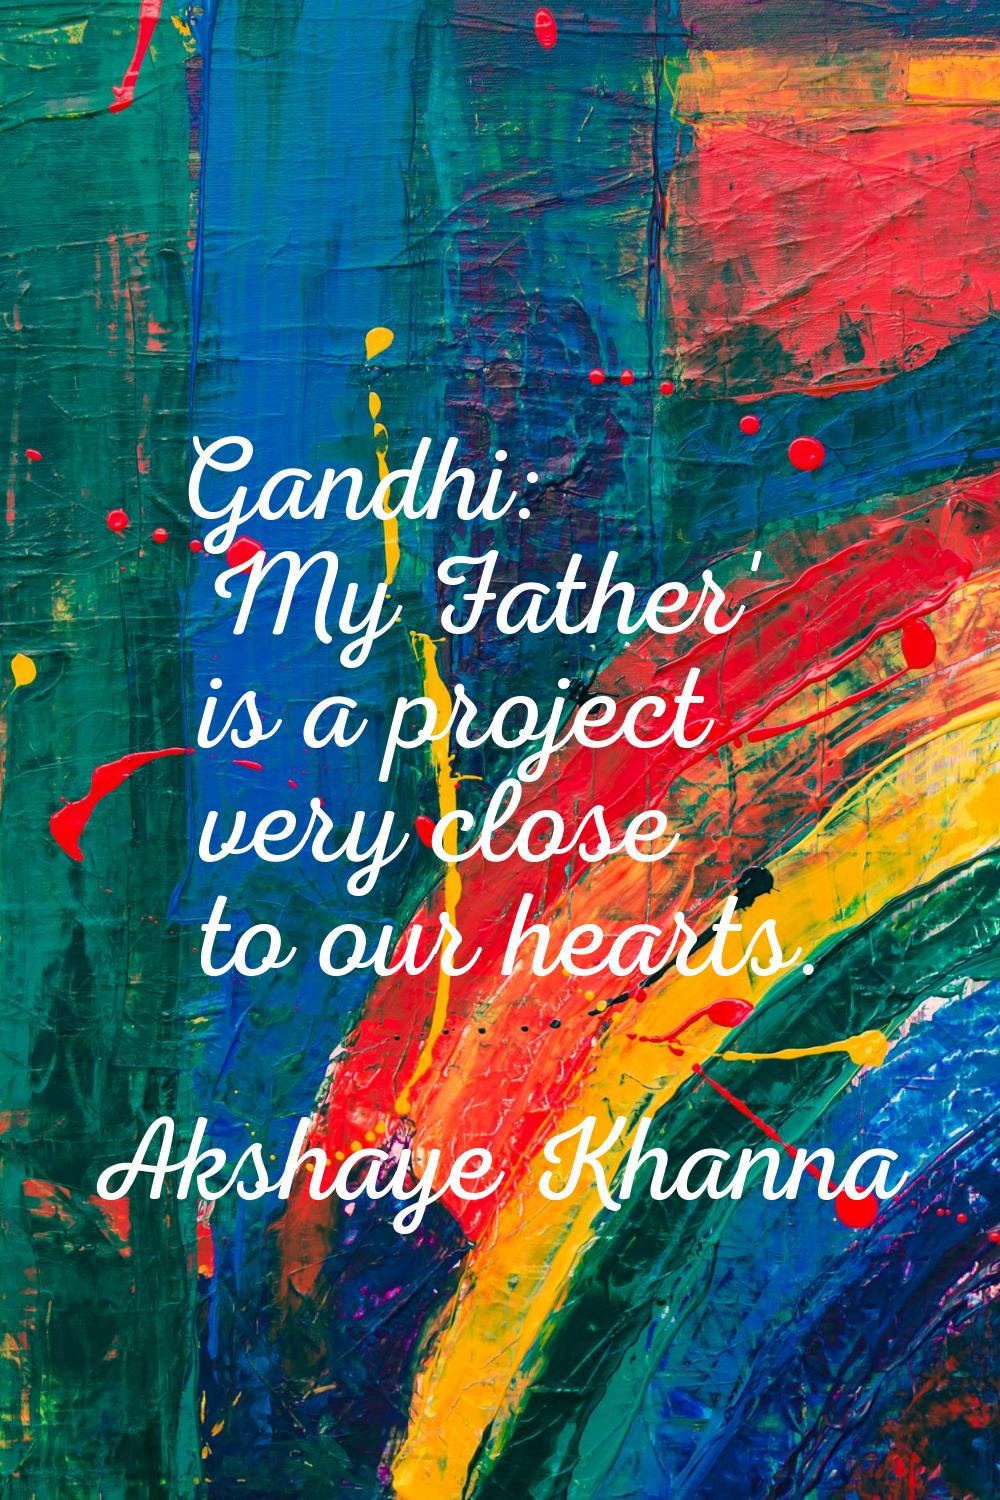 Gandhi: My Father' is a project very close to our hearts.